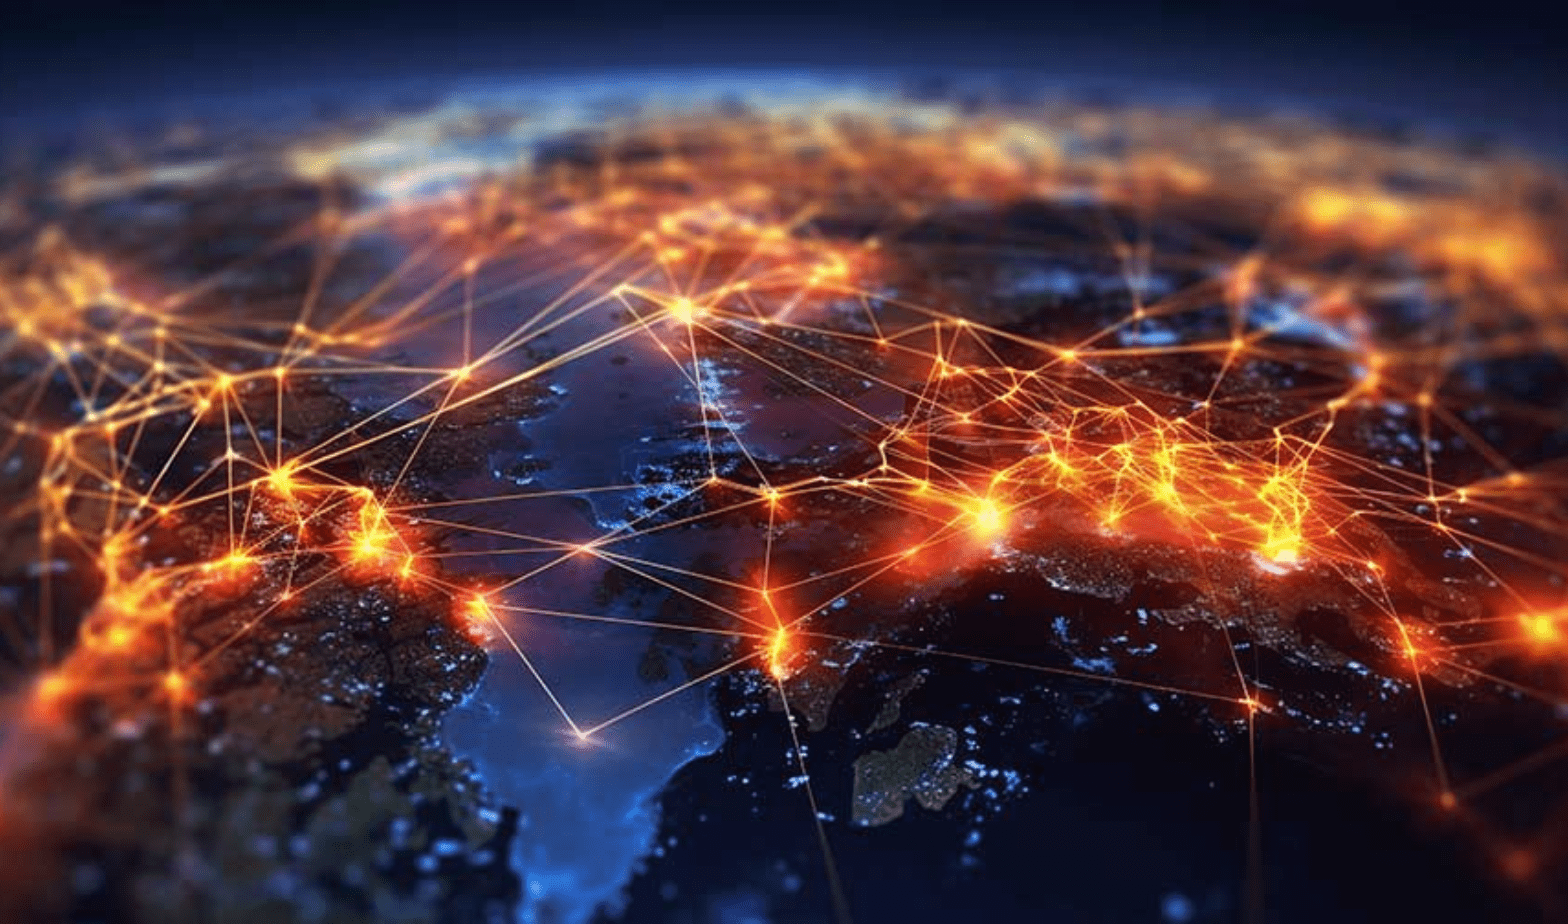 A digital representation of a world map viewed from space, with bright, glowing lines and nodes connecting various points, illustrating a global cybersecurity network. The map is dark with highlighted regions and illuminated pathways crisscrossing the continents, showcasing an evolving threat landscape.